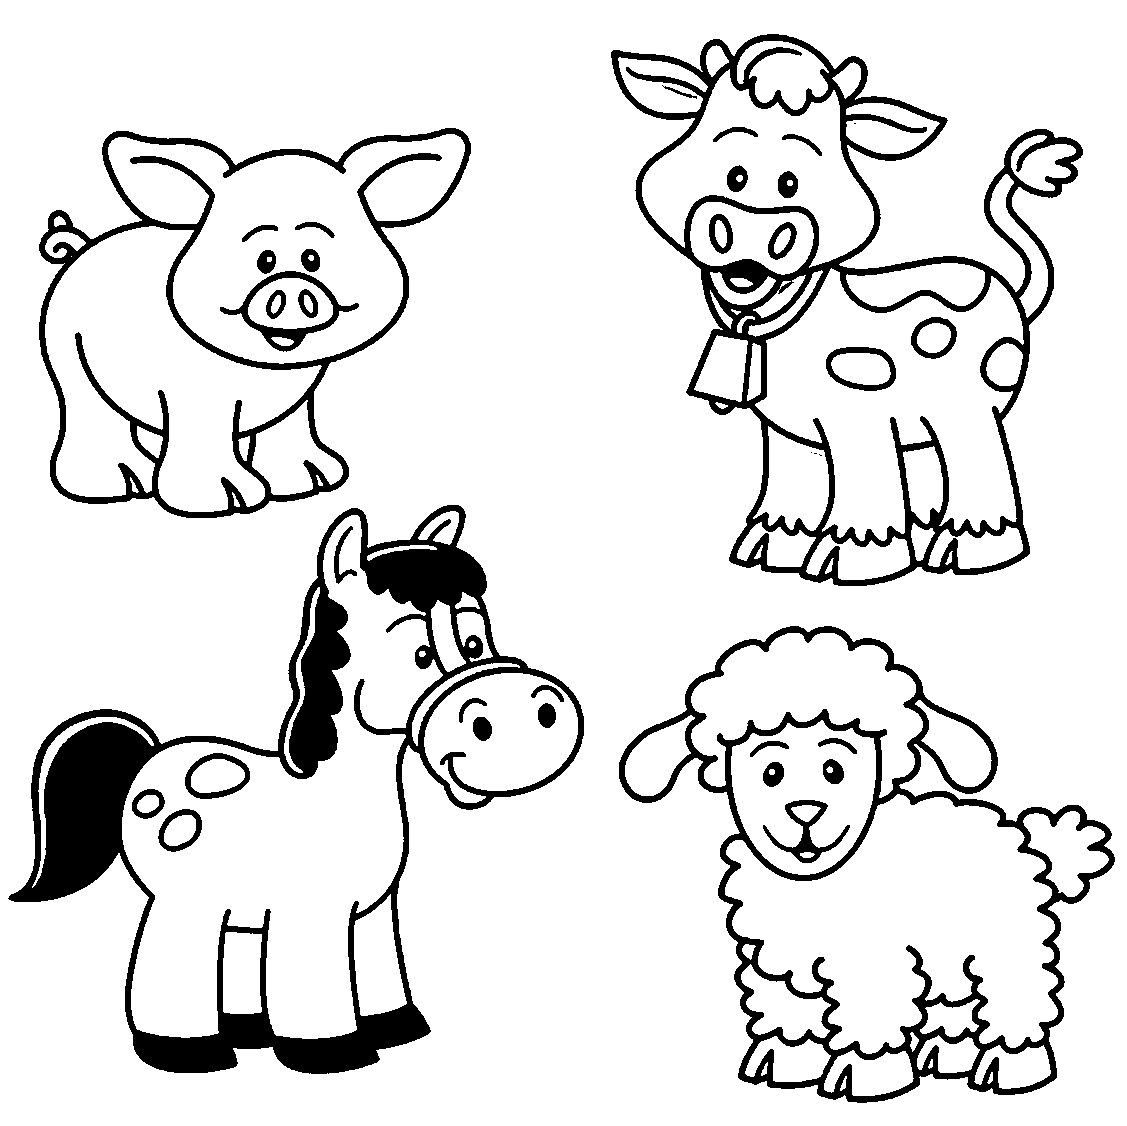 Baby Farm Animal Coloring Pages
 Cute Baby Farm Animals Coloring Page Coloring Pages